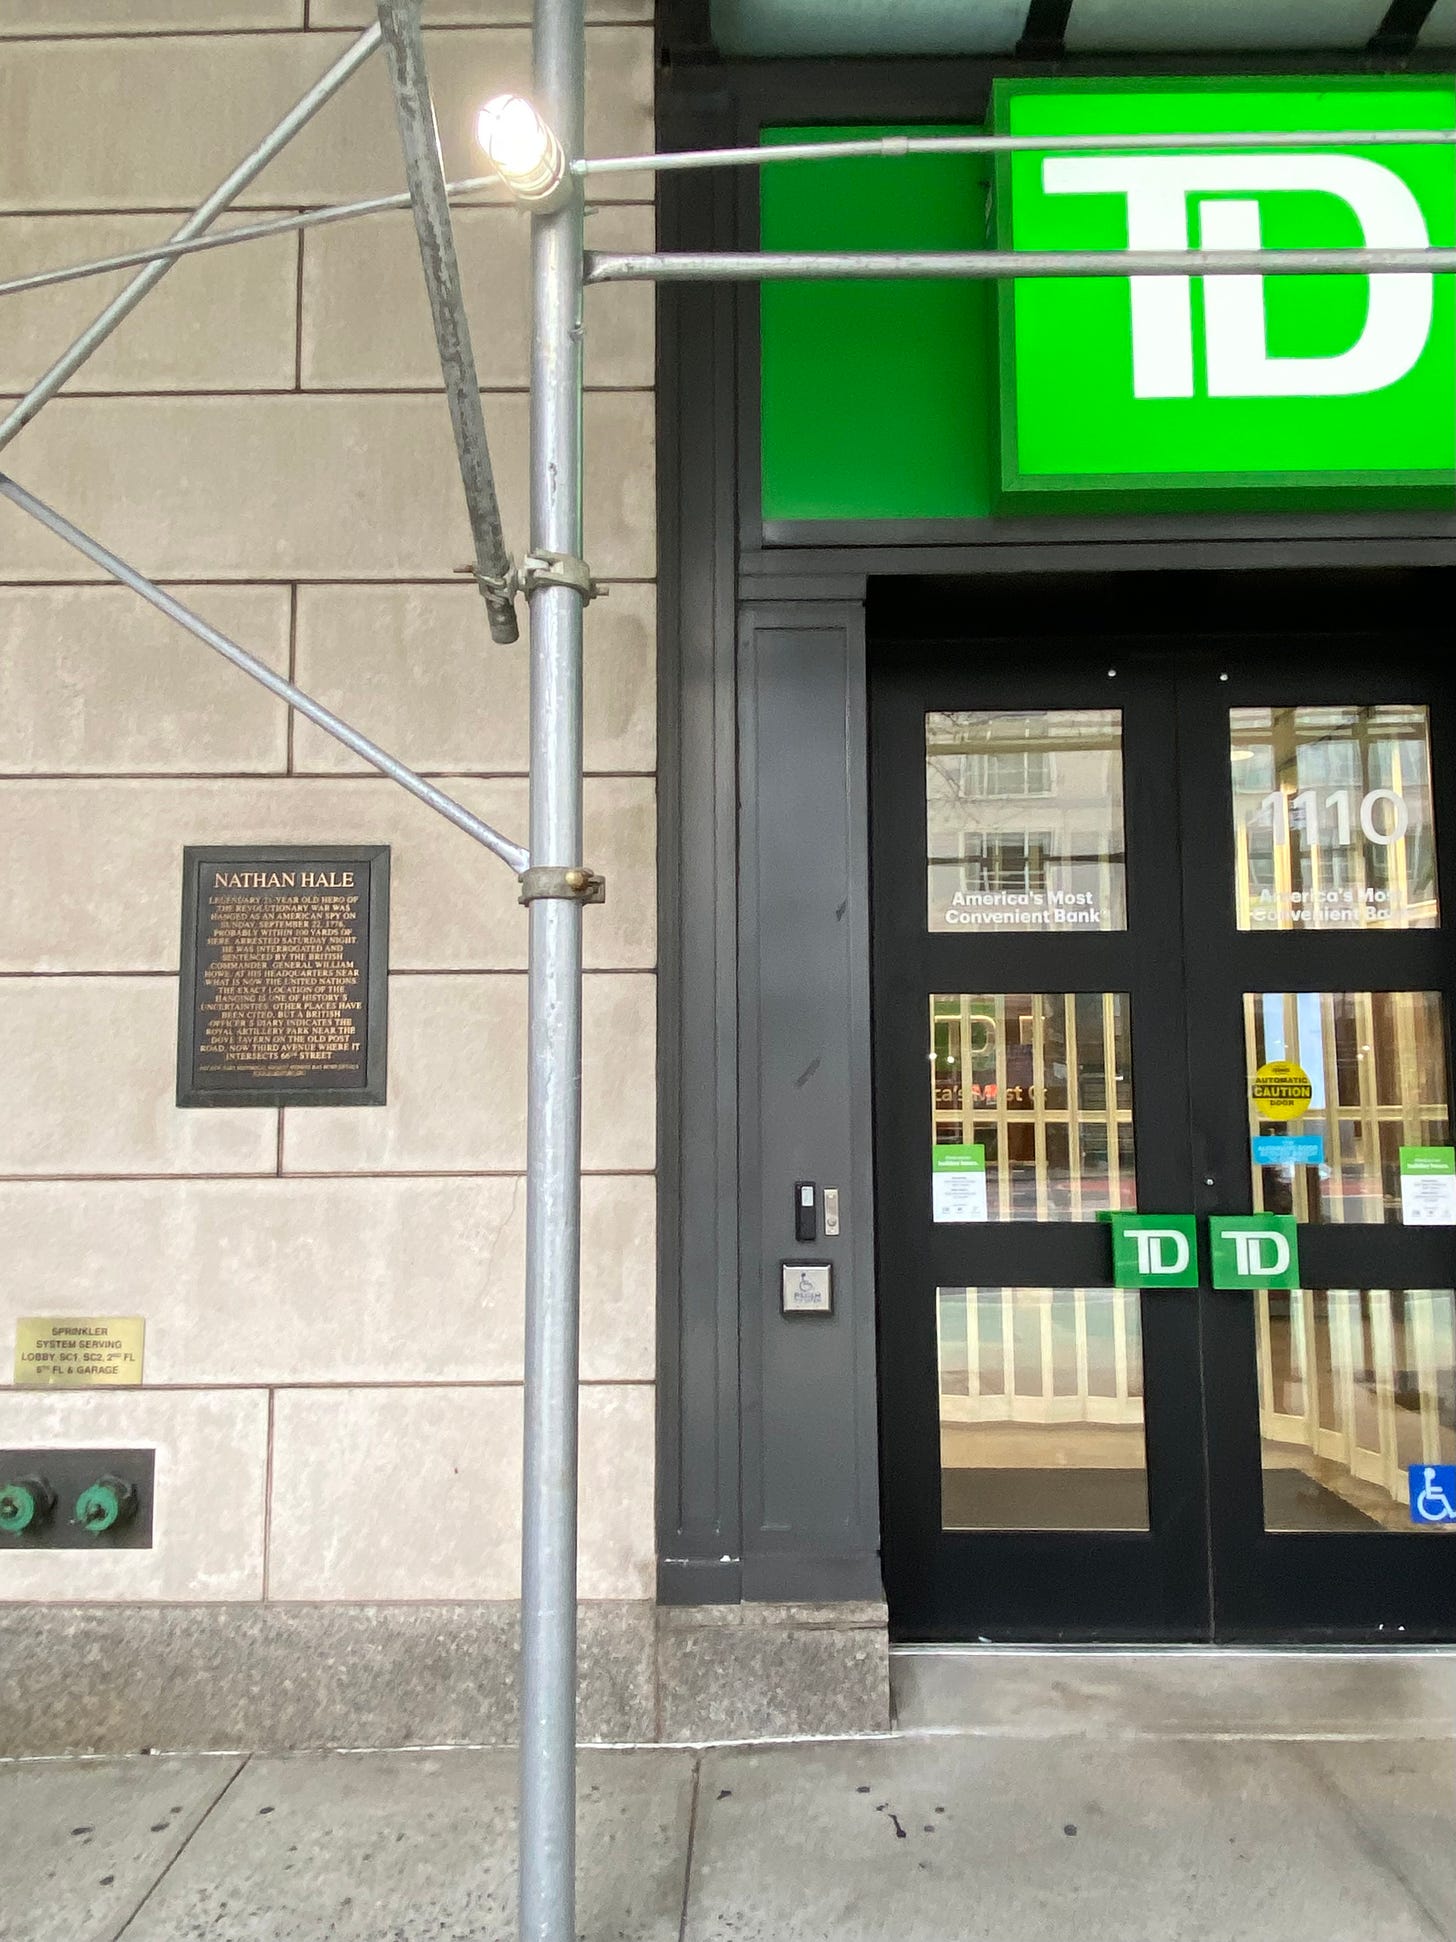 The entrance of a TD Bank covered in scaffolding with a plaque that has NATHAN HALE written on top in all caps.